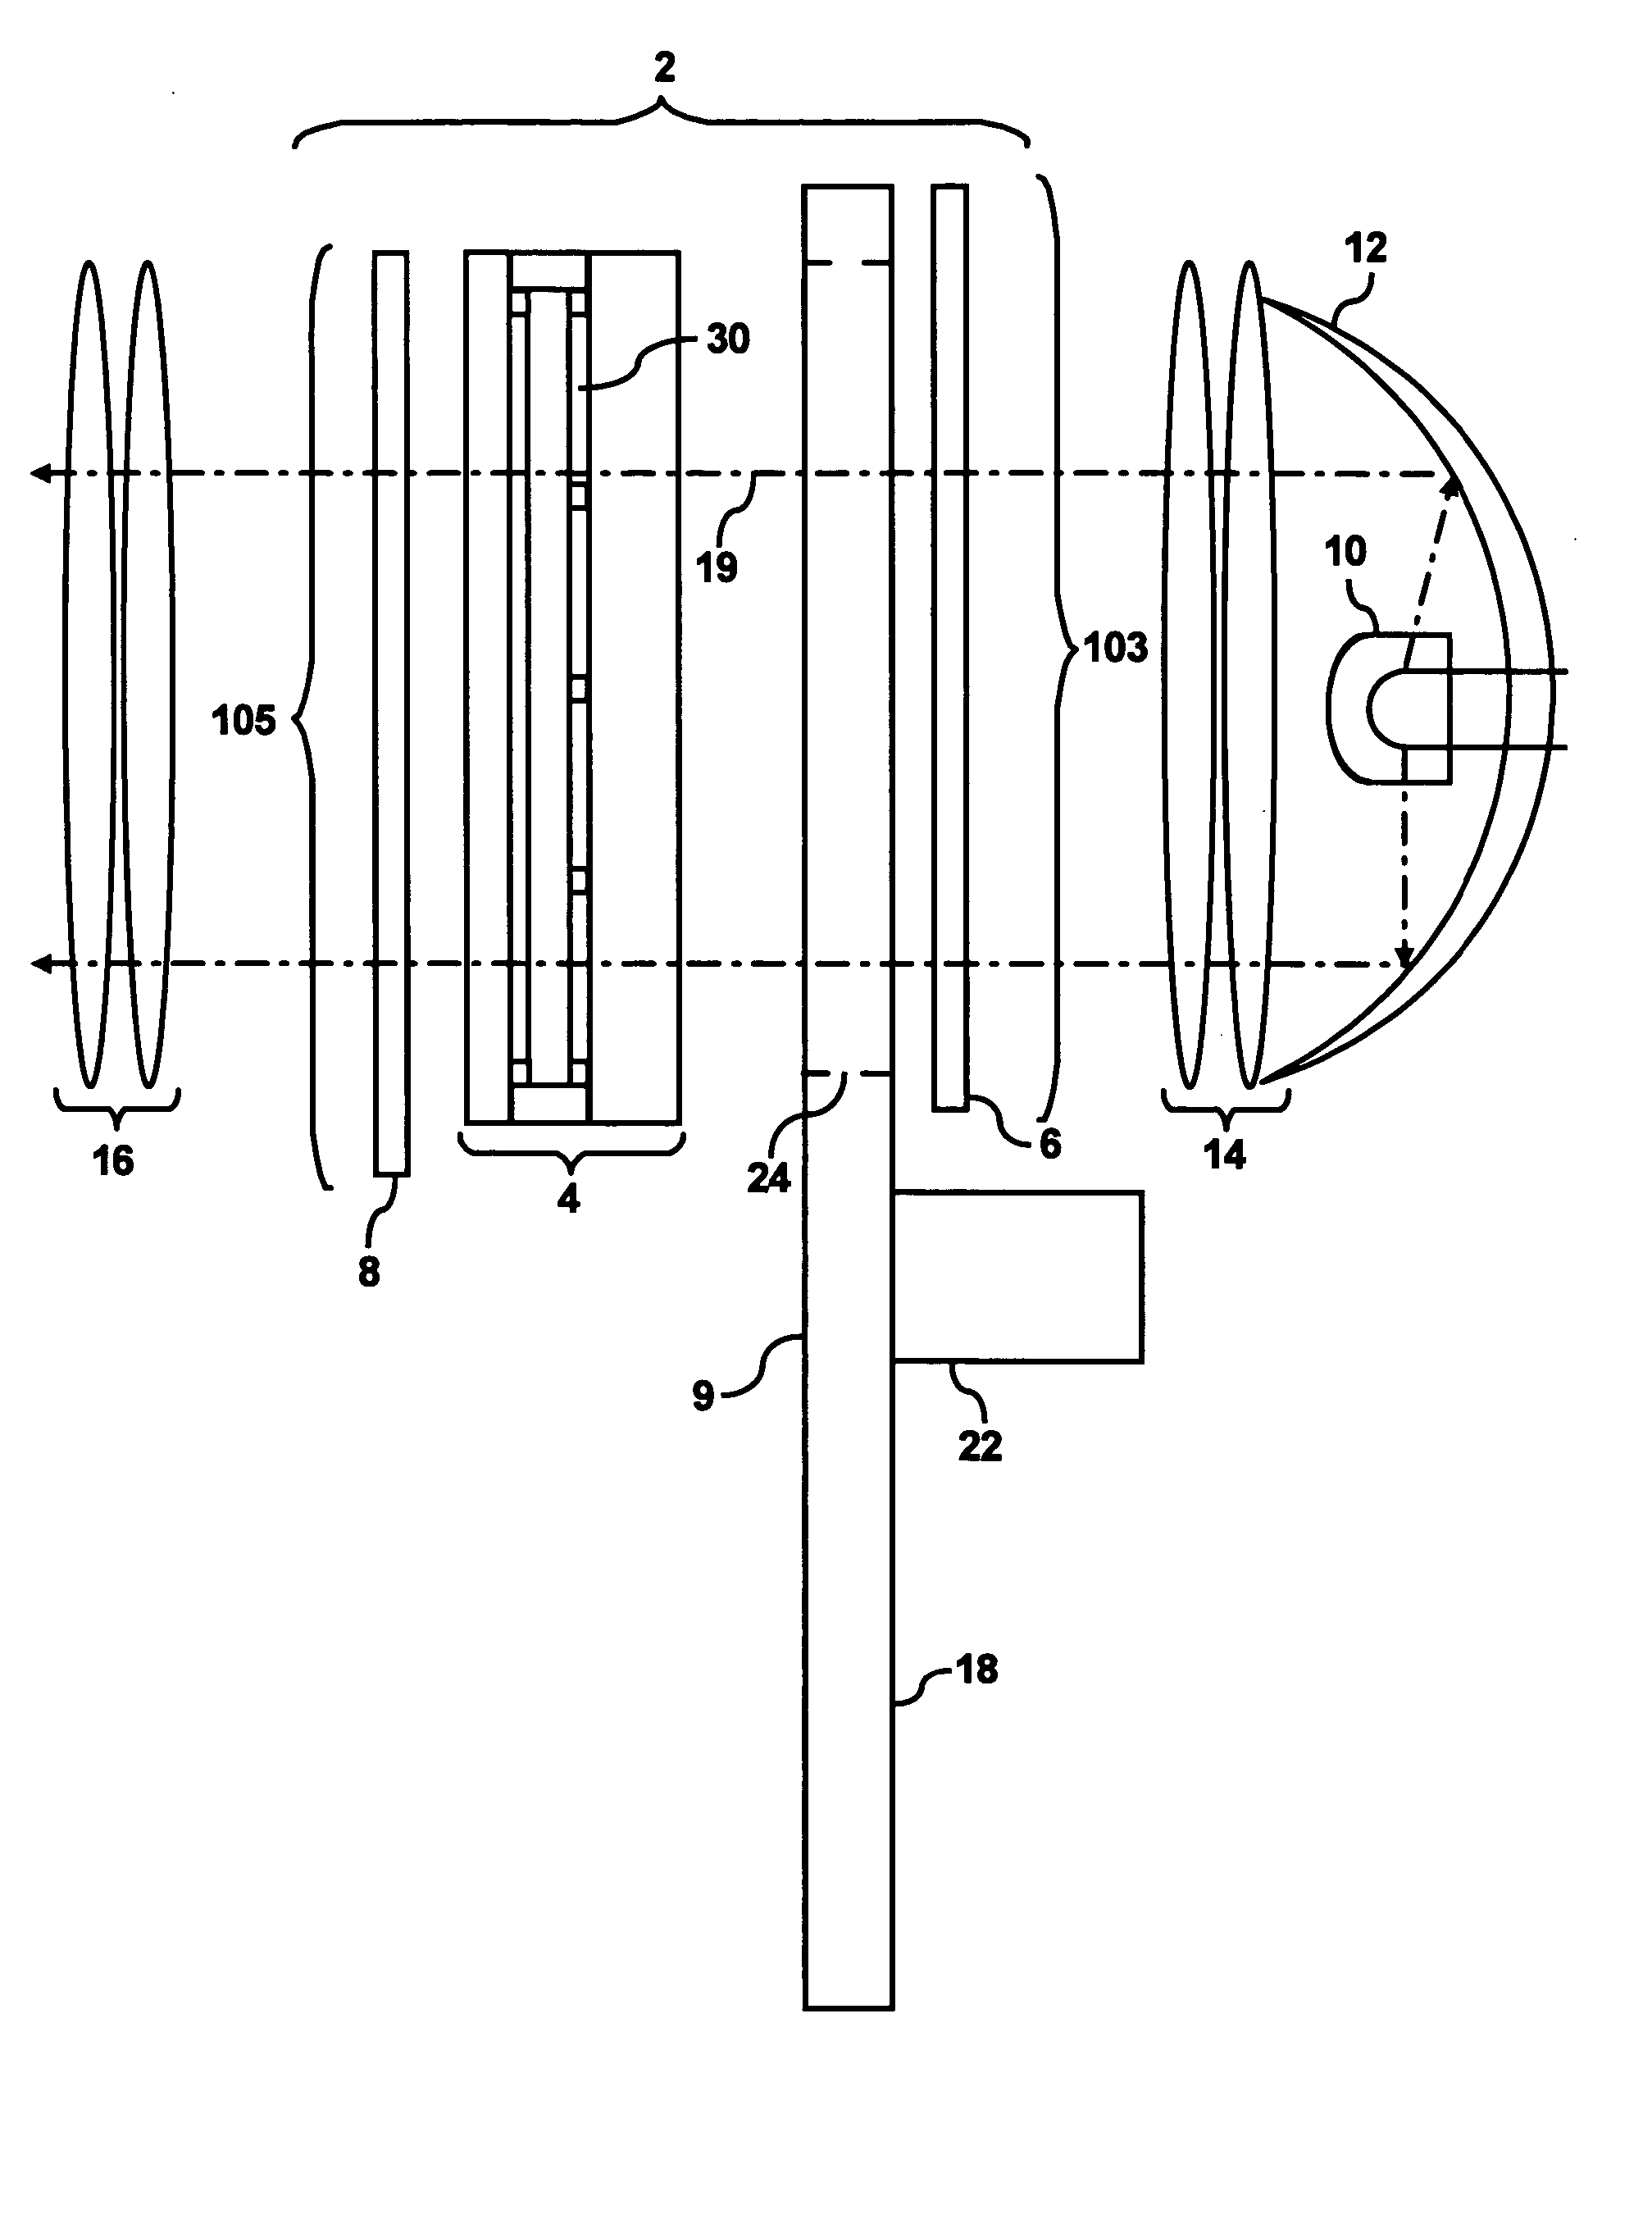 Method of illuminating a light valve with an overdrive level